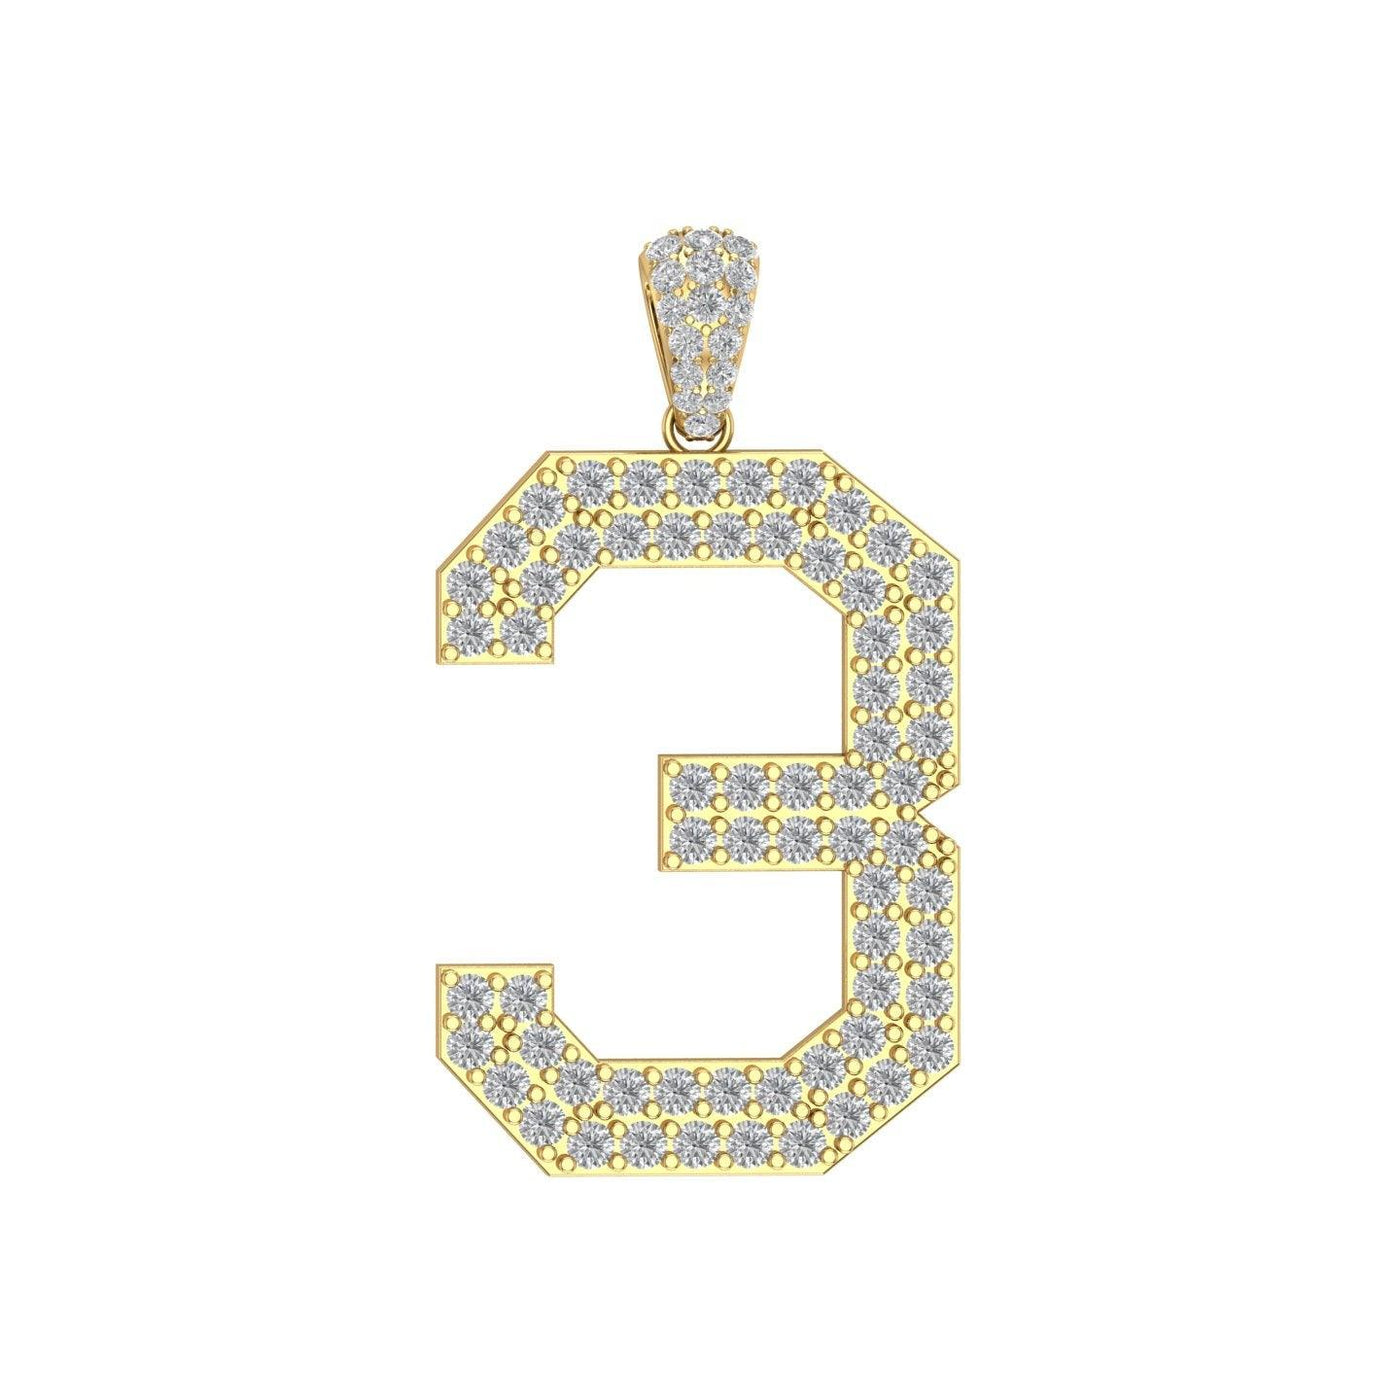 Gold Color Pendant in the Shape of 3 Made of 925 Sterling Silver Material with 20 Inch Long Silver Chain